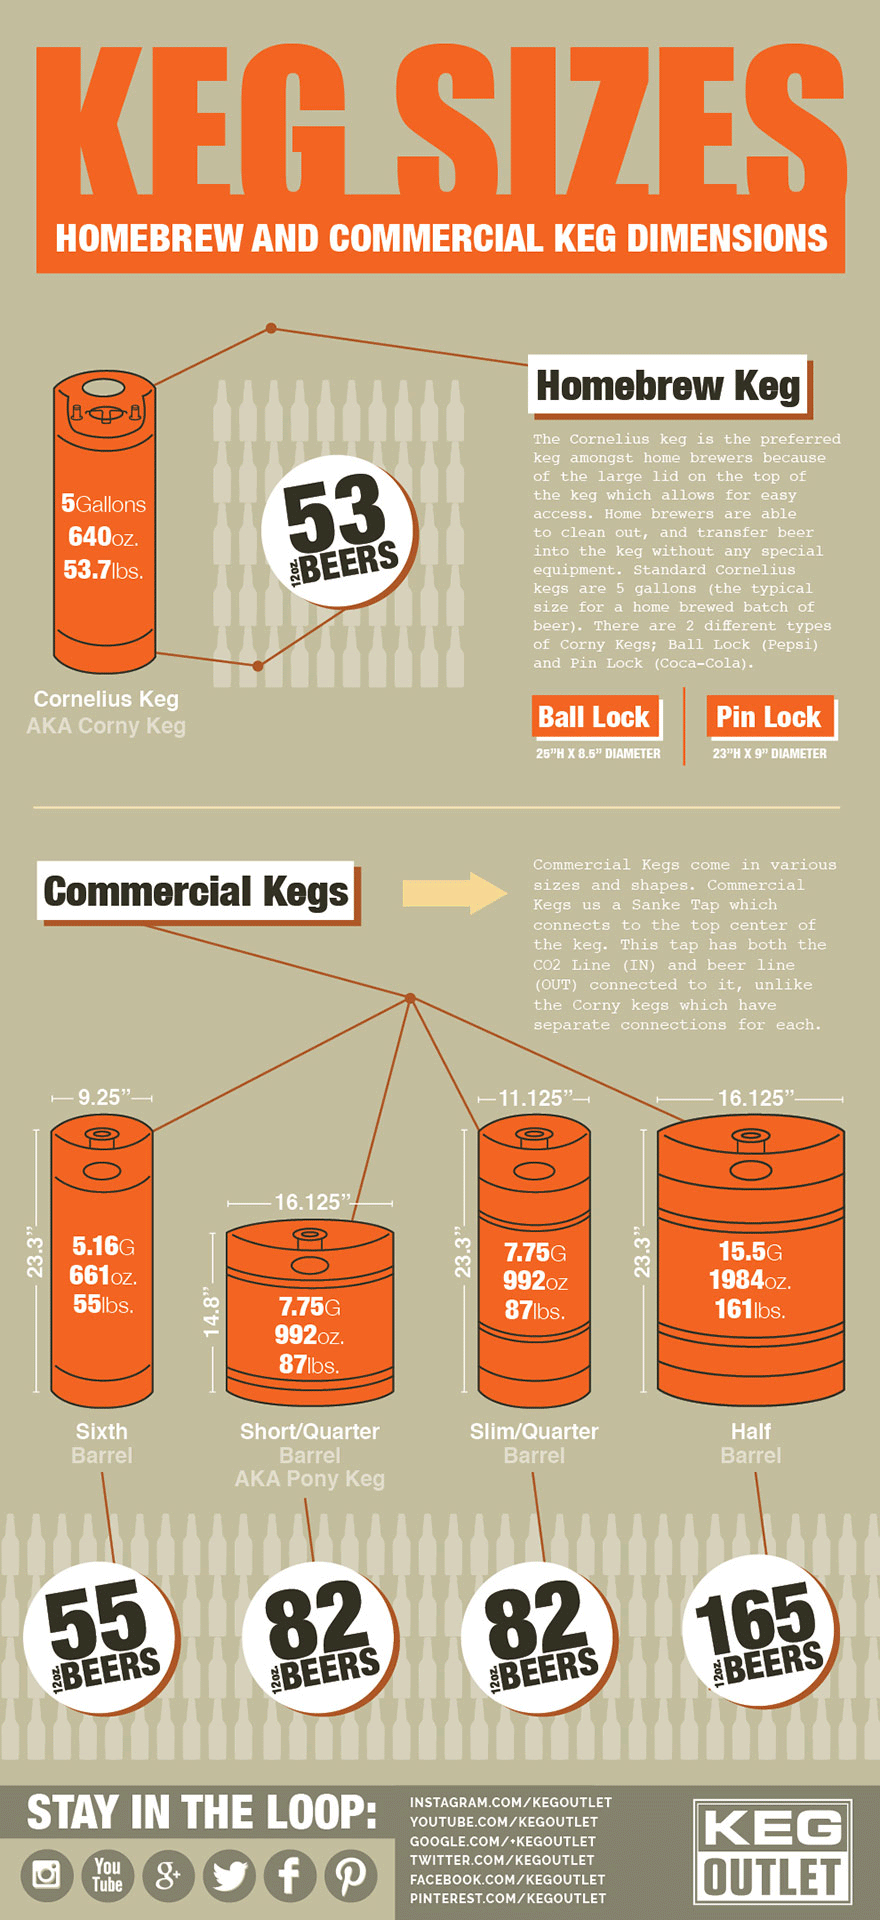 keg-sizes-infographic-homebrew-and-commercial-keg-dimensions